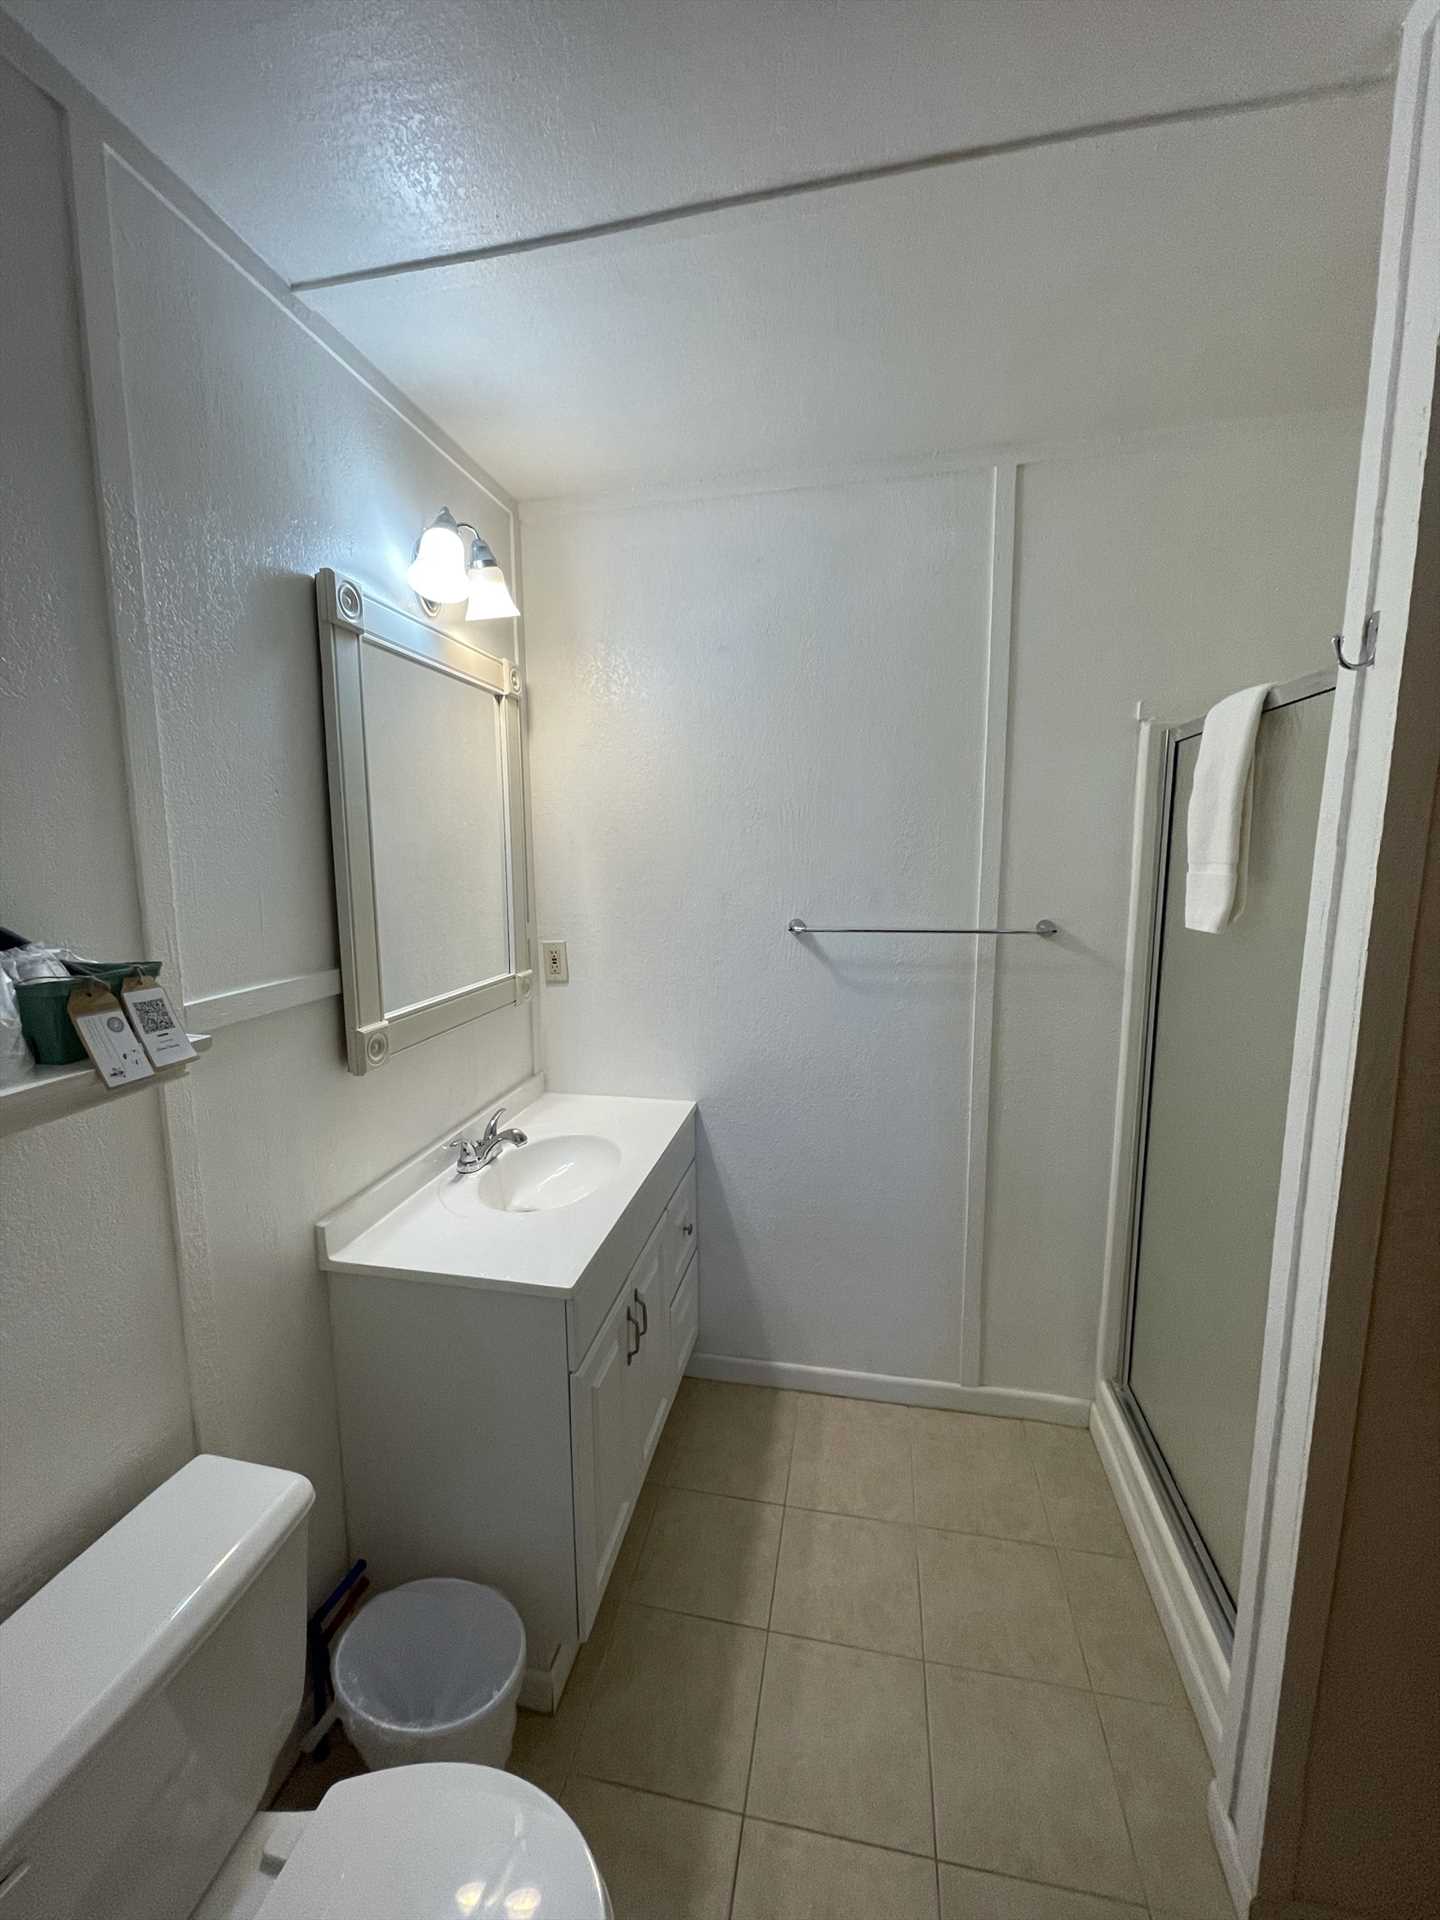                                                 You'll find a shower stall and clean linens on hand in the immaculate full bath.